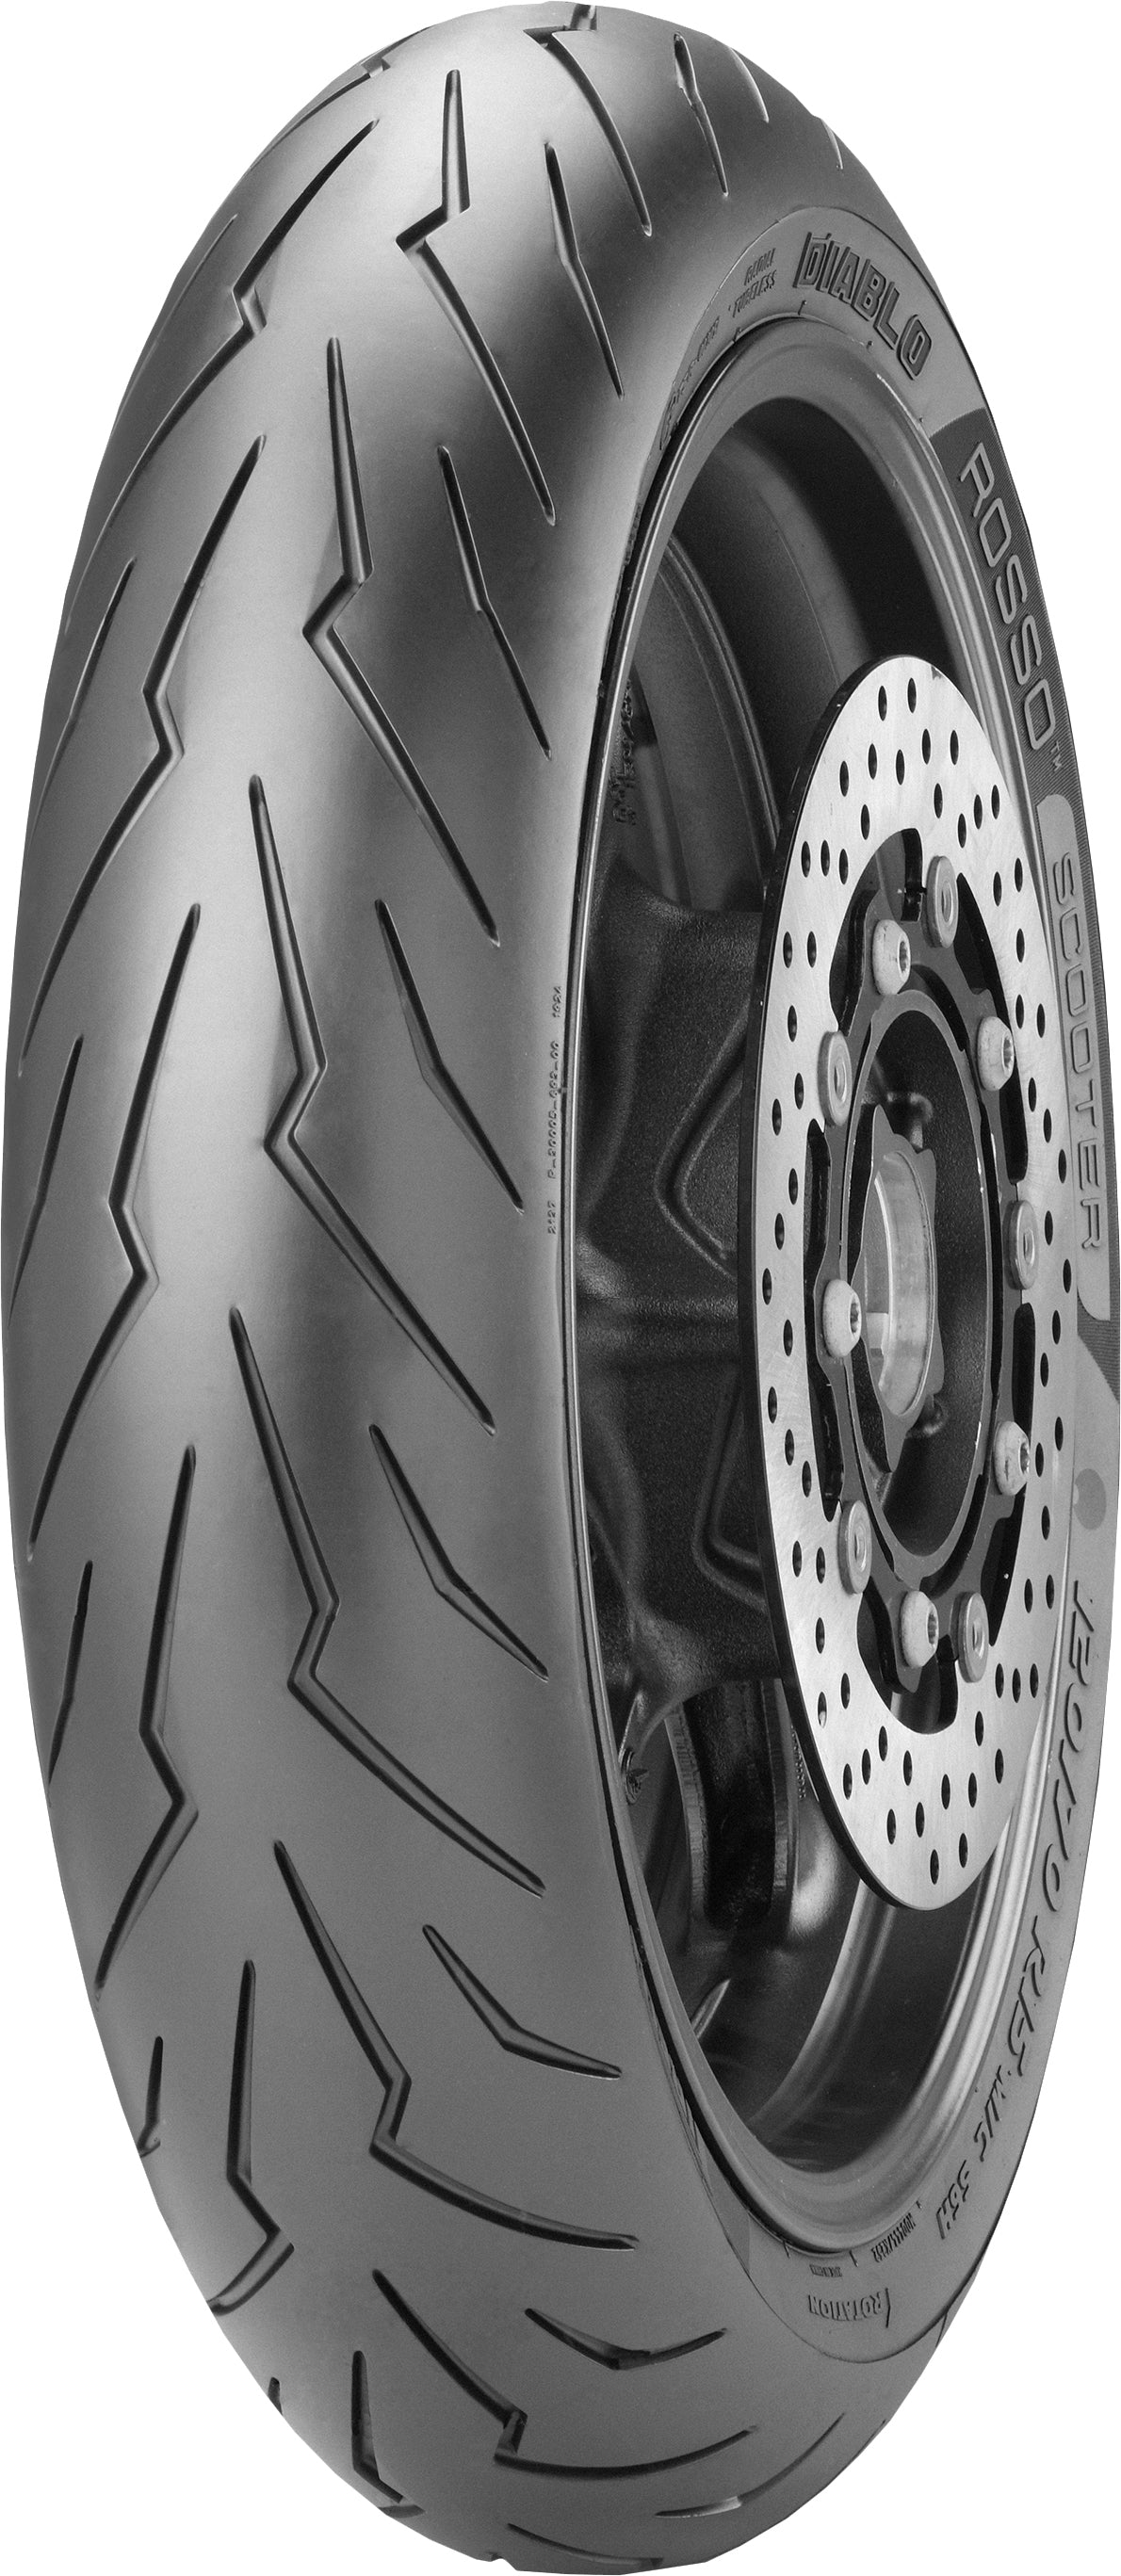 PIRELLI Tire Diablorosso Scooter Front 110/70 12 47p Bias for Powersports